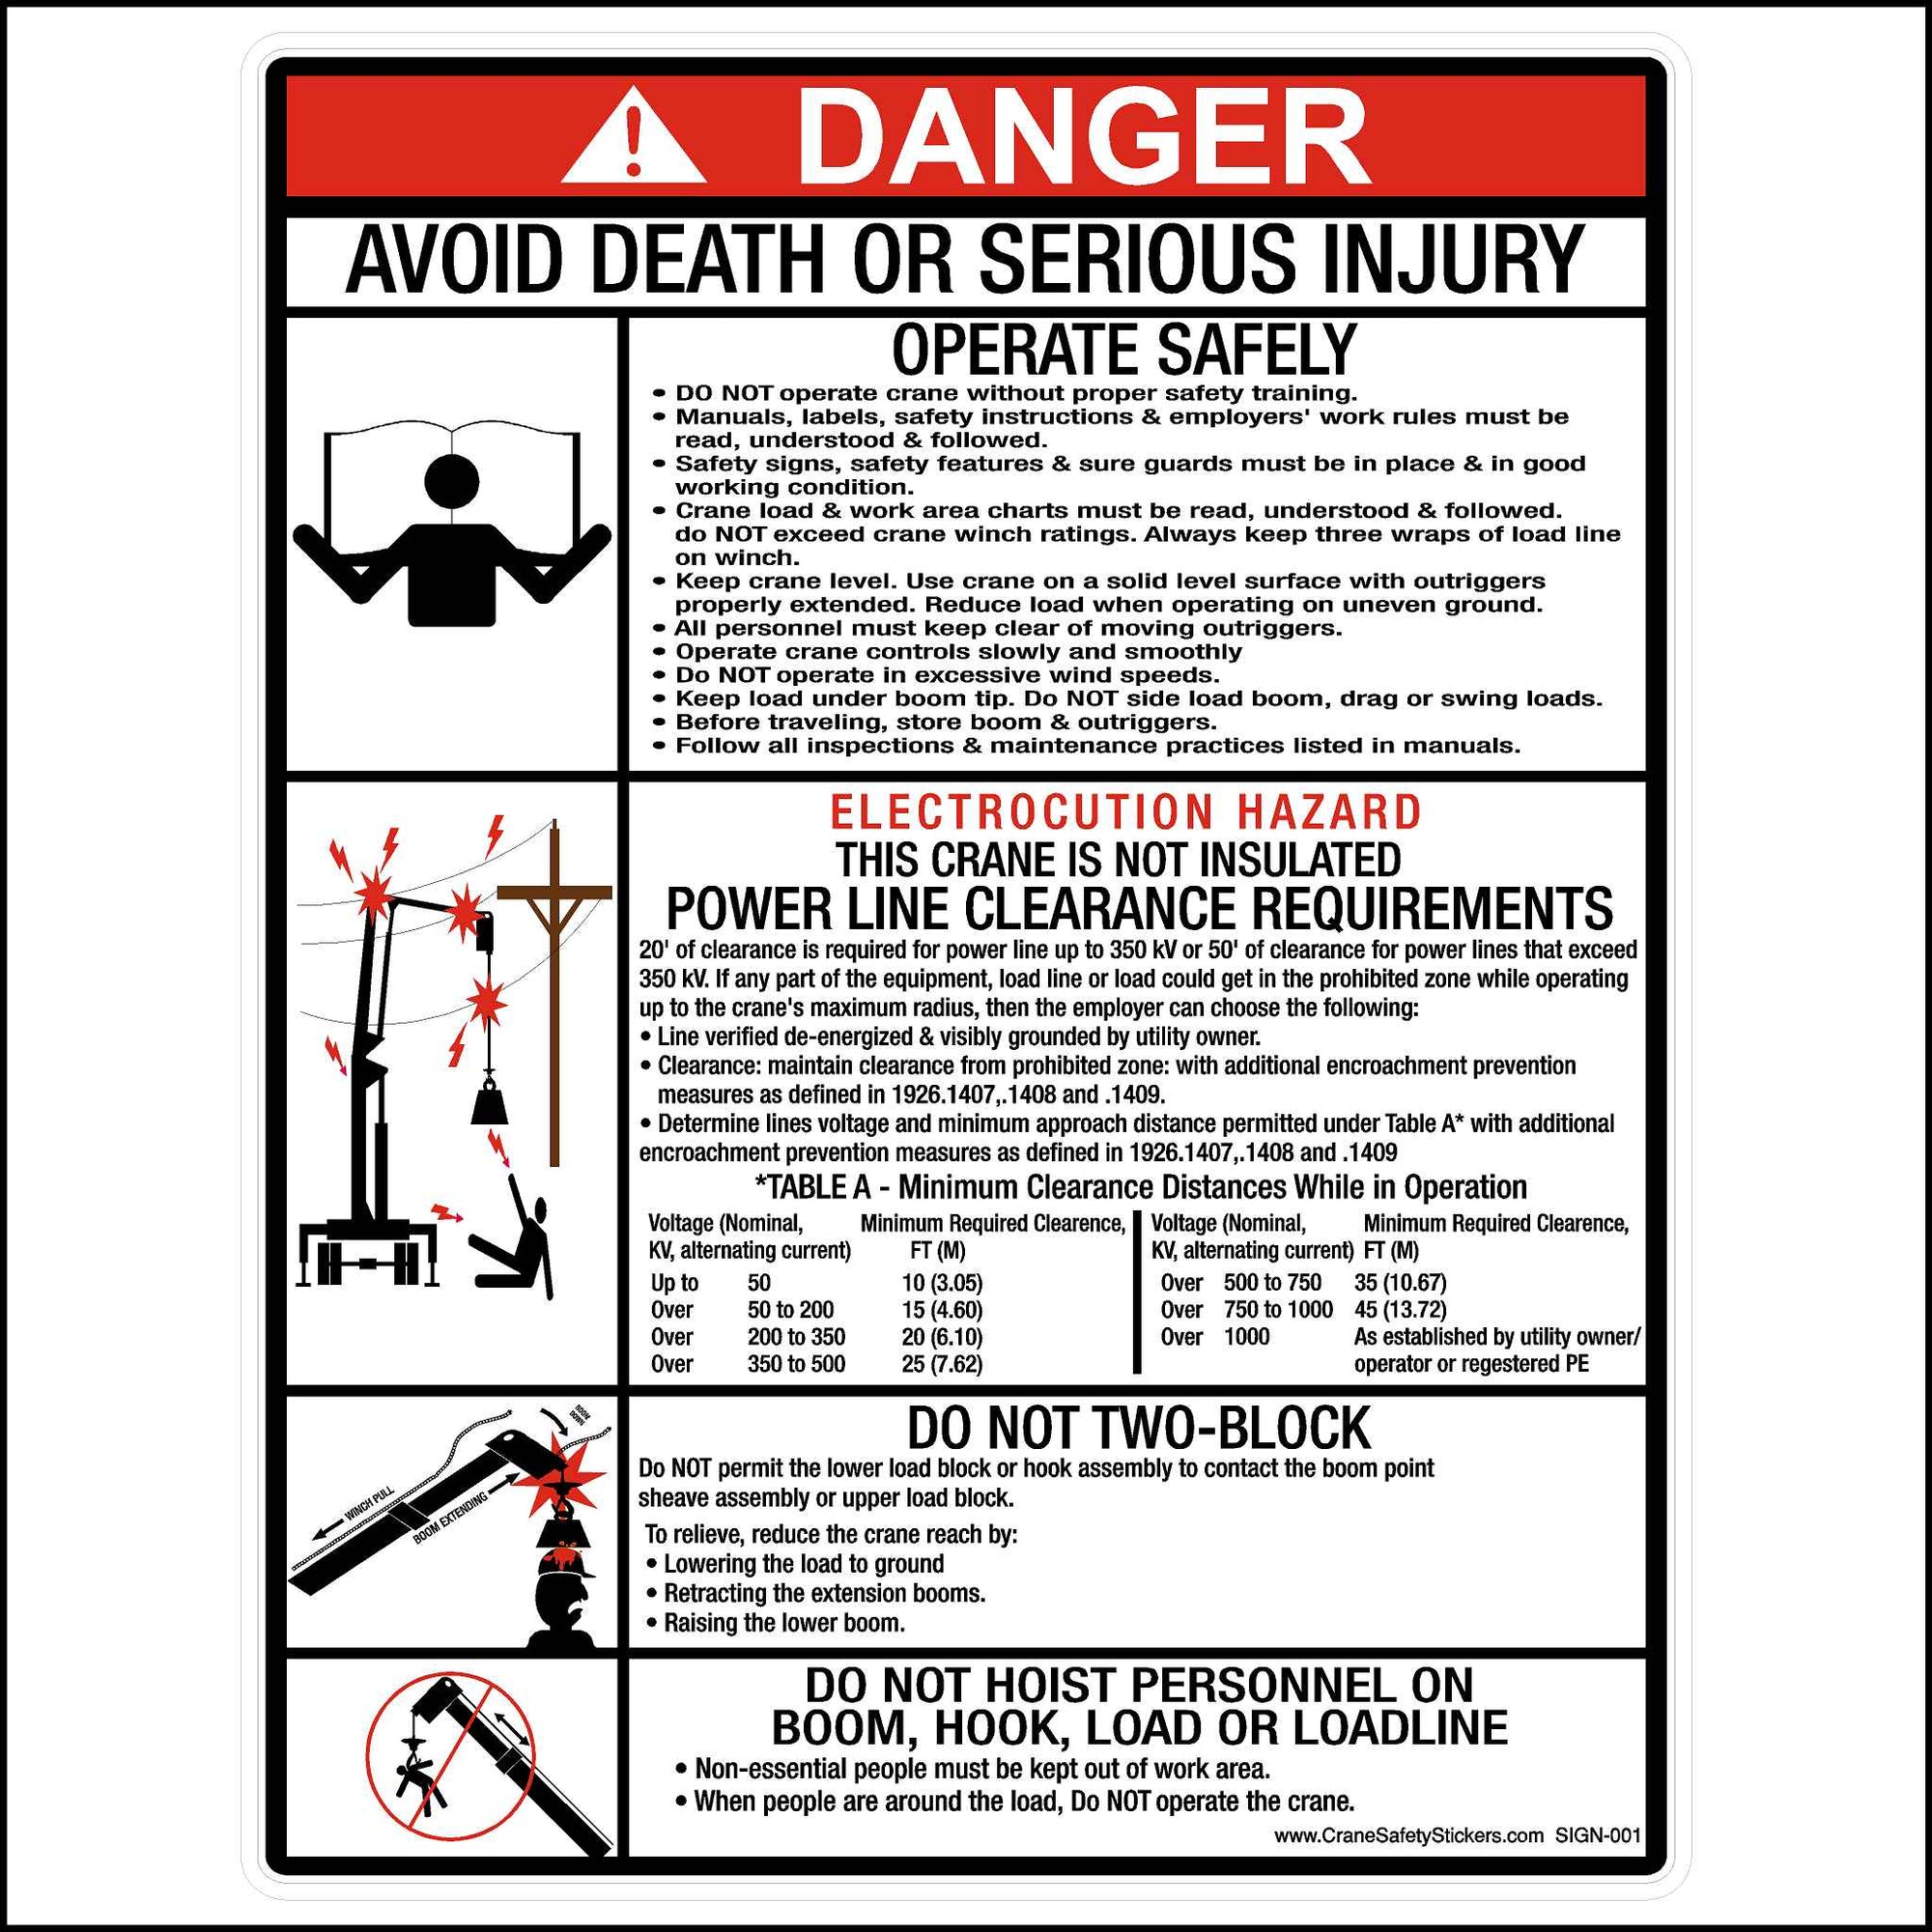 Crane Safety Stickers Multiple Hazard Decal Printed With. DANGER Operate Safely, Electrical Hazard, Two Block and Do Not Hoist Crane Safety Stickers.  This Crane Safety Sticker covers operation safety, Electrocution hazard, power line clearance, do not two-block, and do not hoist.